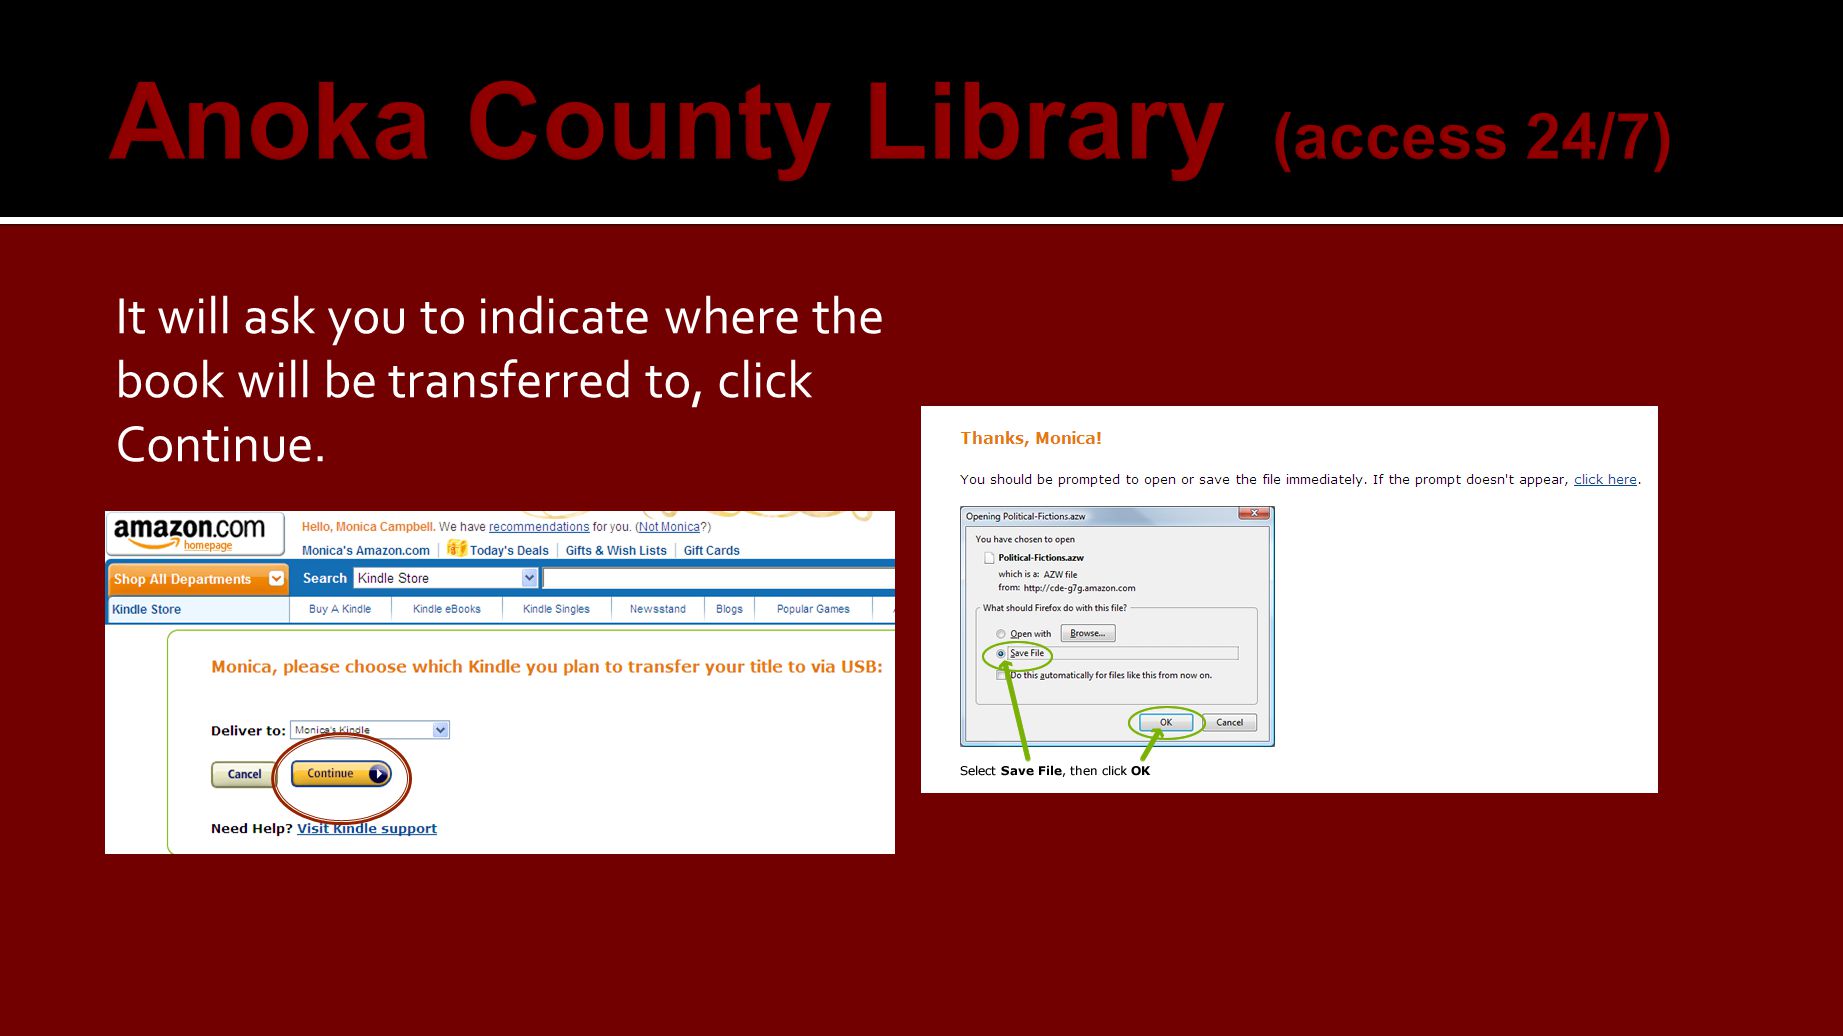 It will ask you to indicate where the book will be transferred to, click Continue.